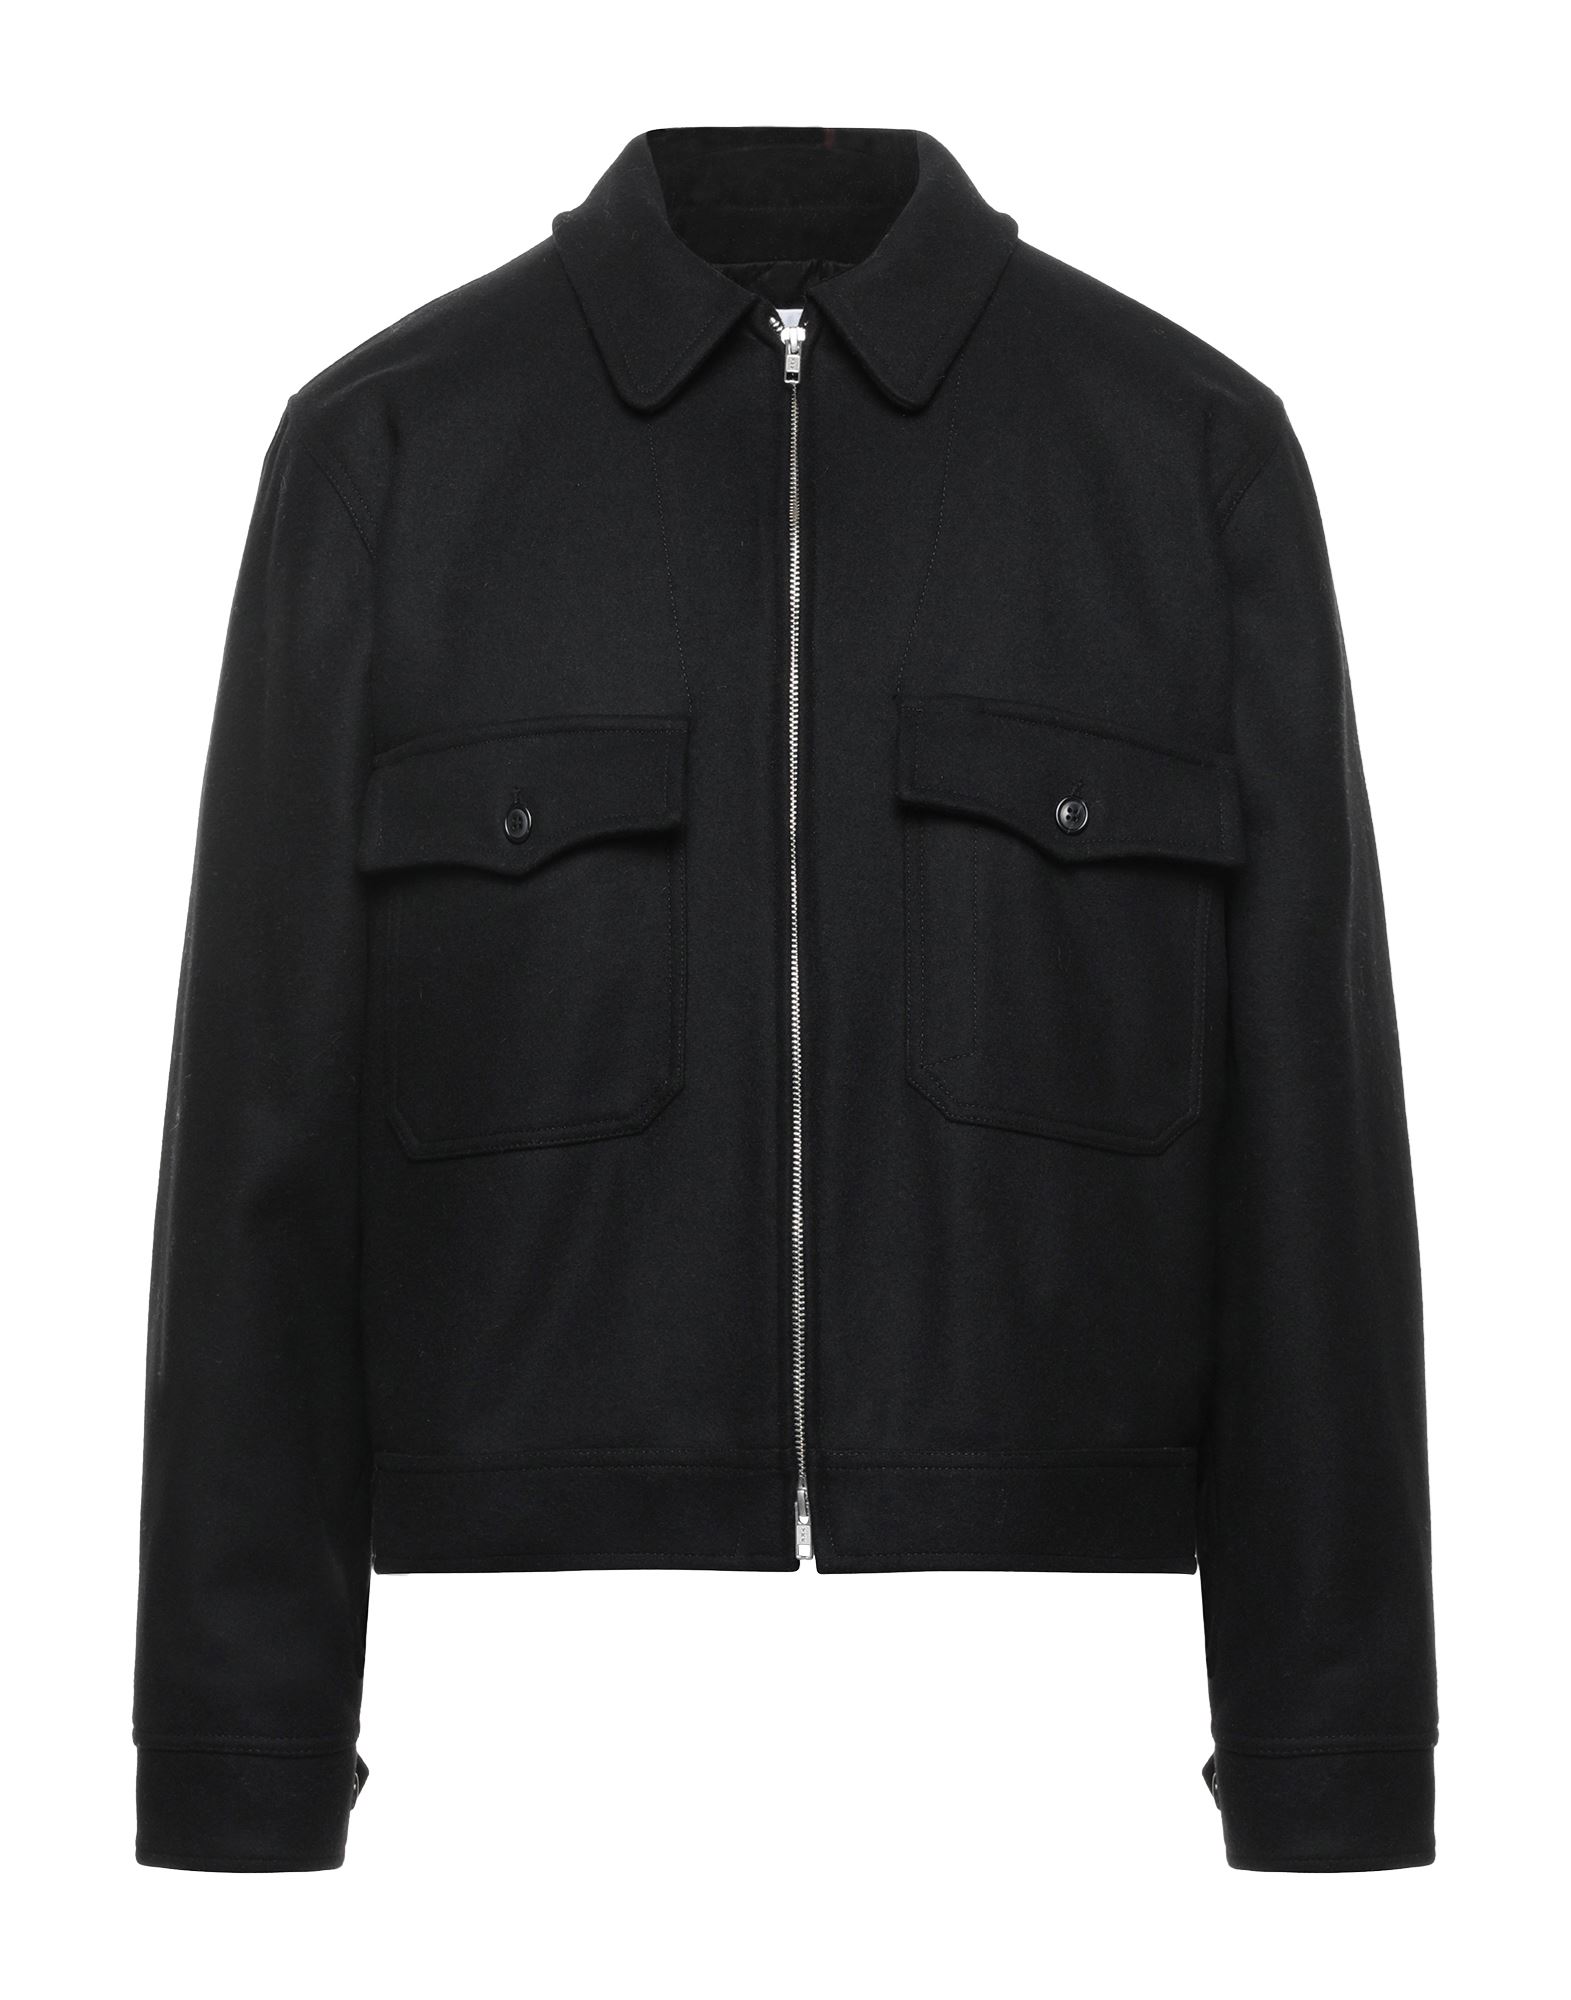 Mauro Grifoni Jackets In Black